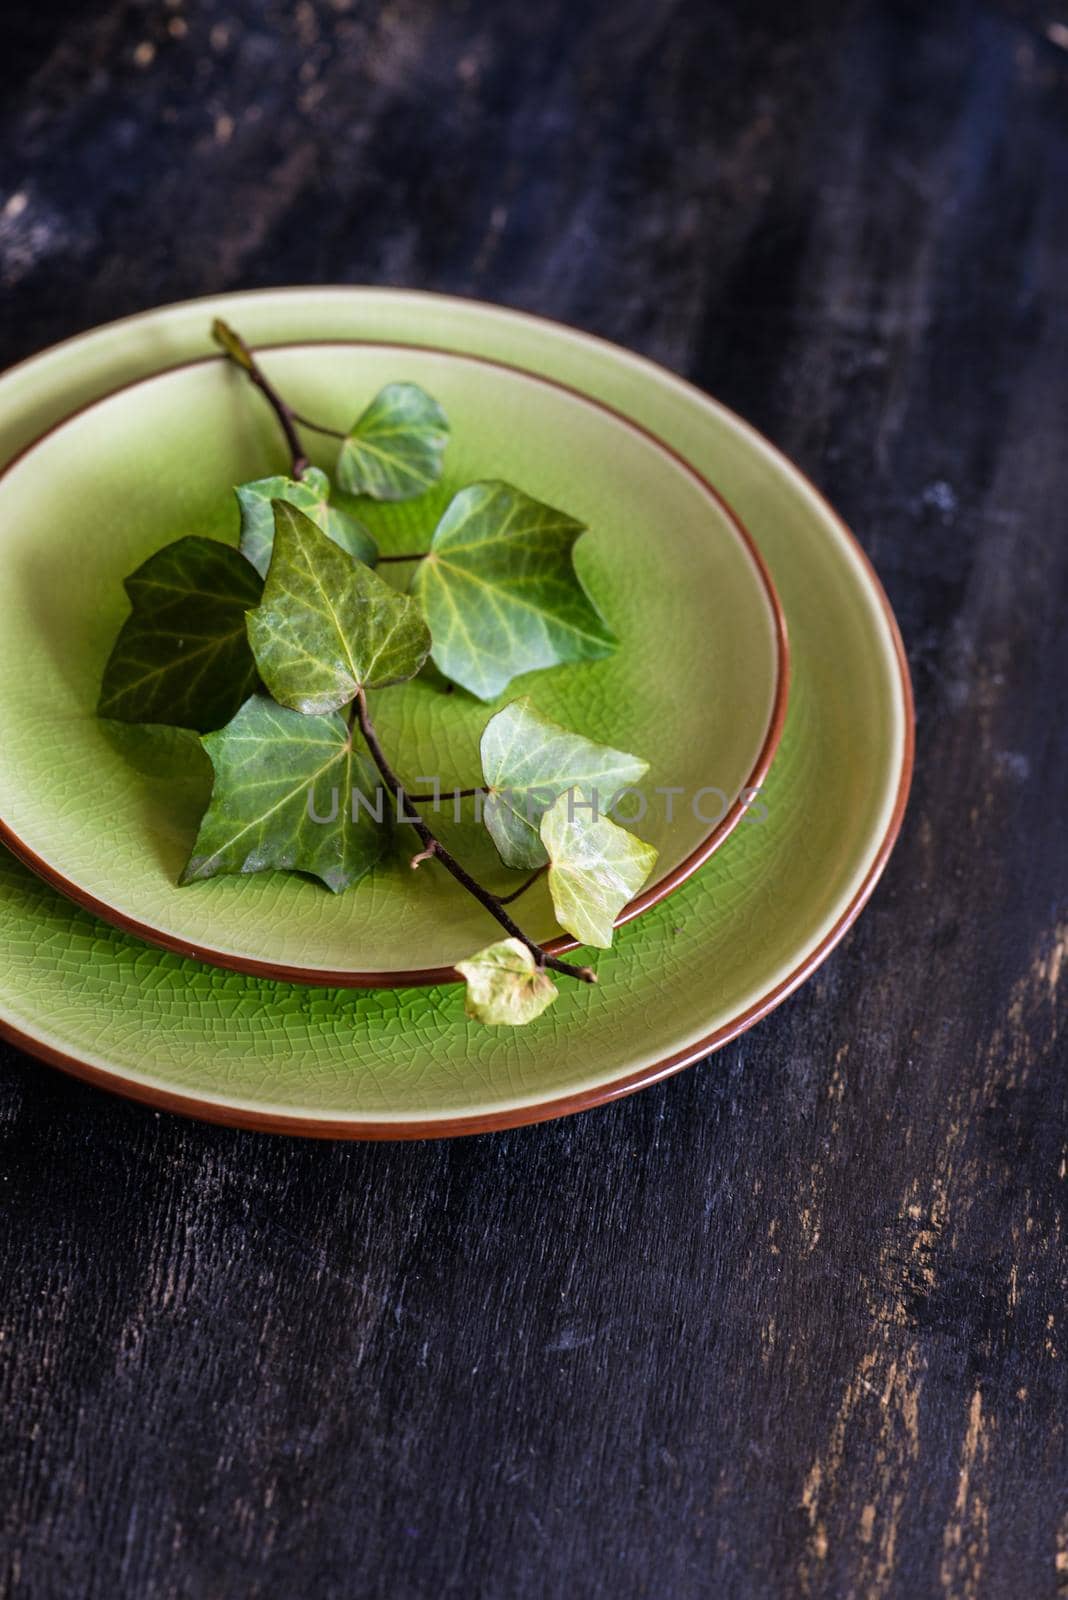 Rustic table setting with wild grape leaves on the plate on dark wooden table